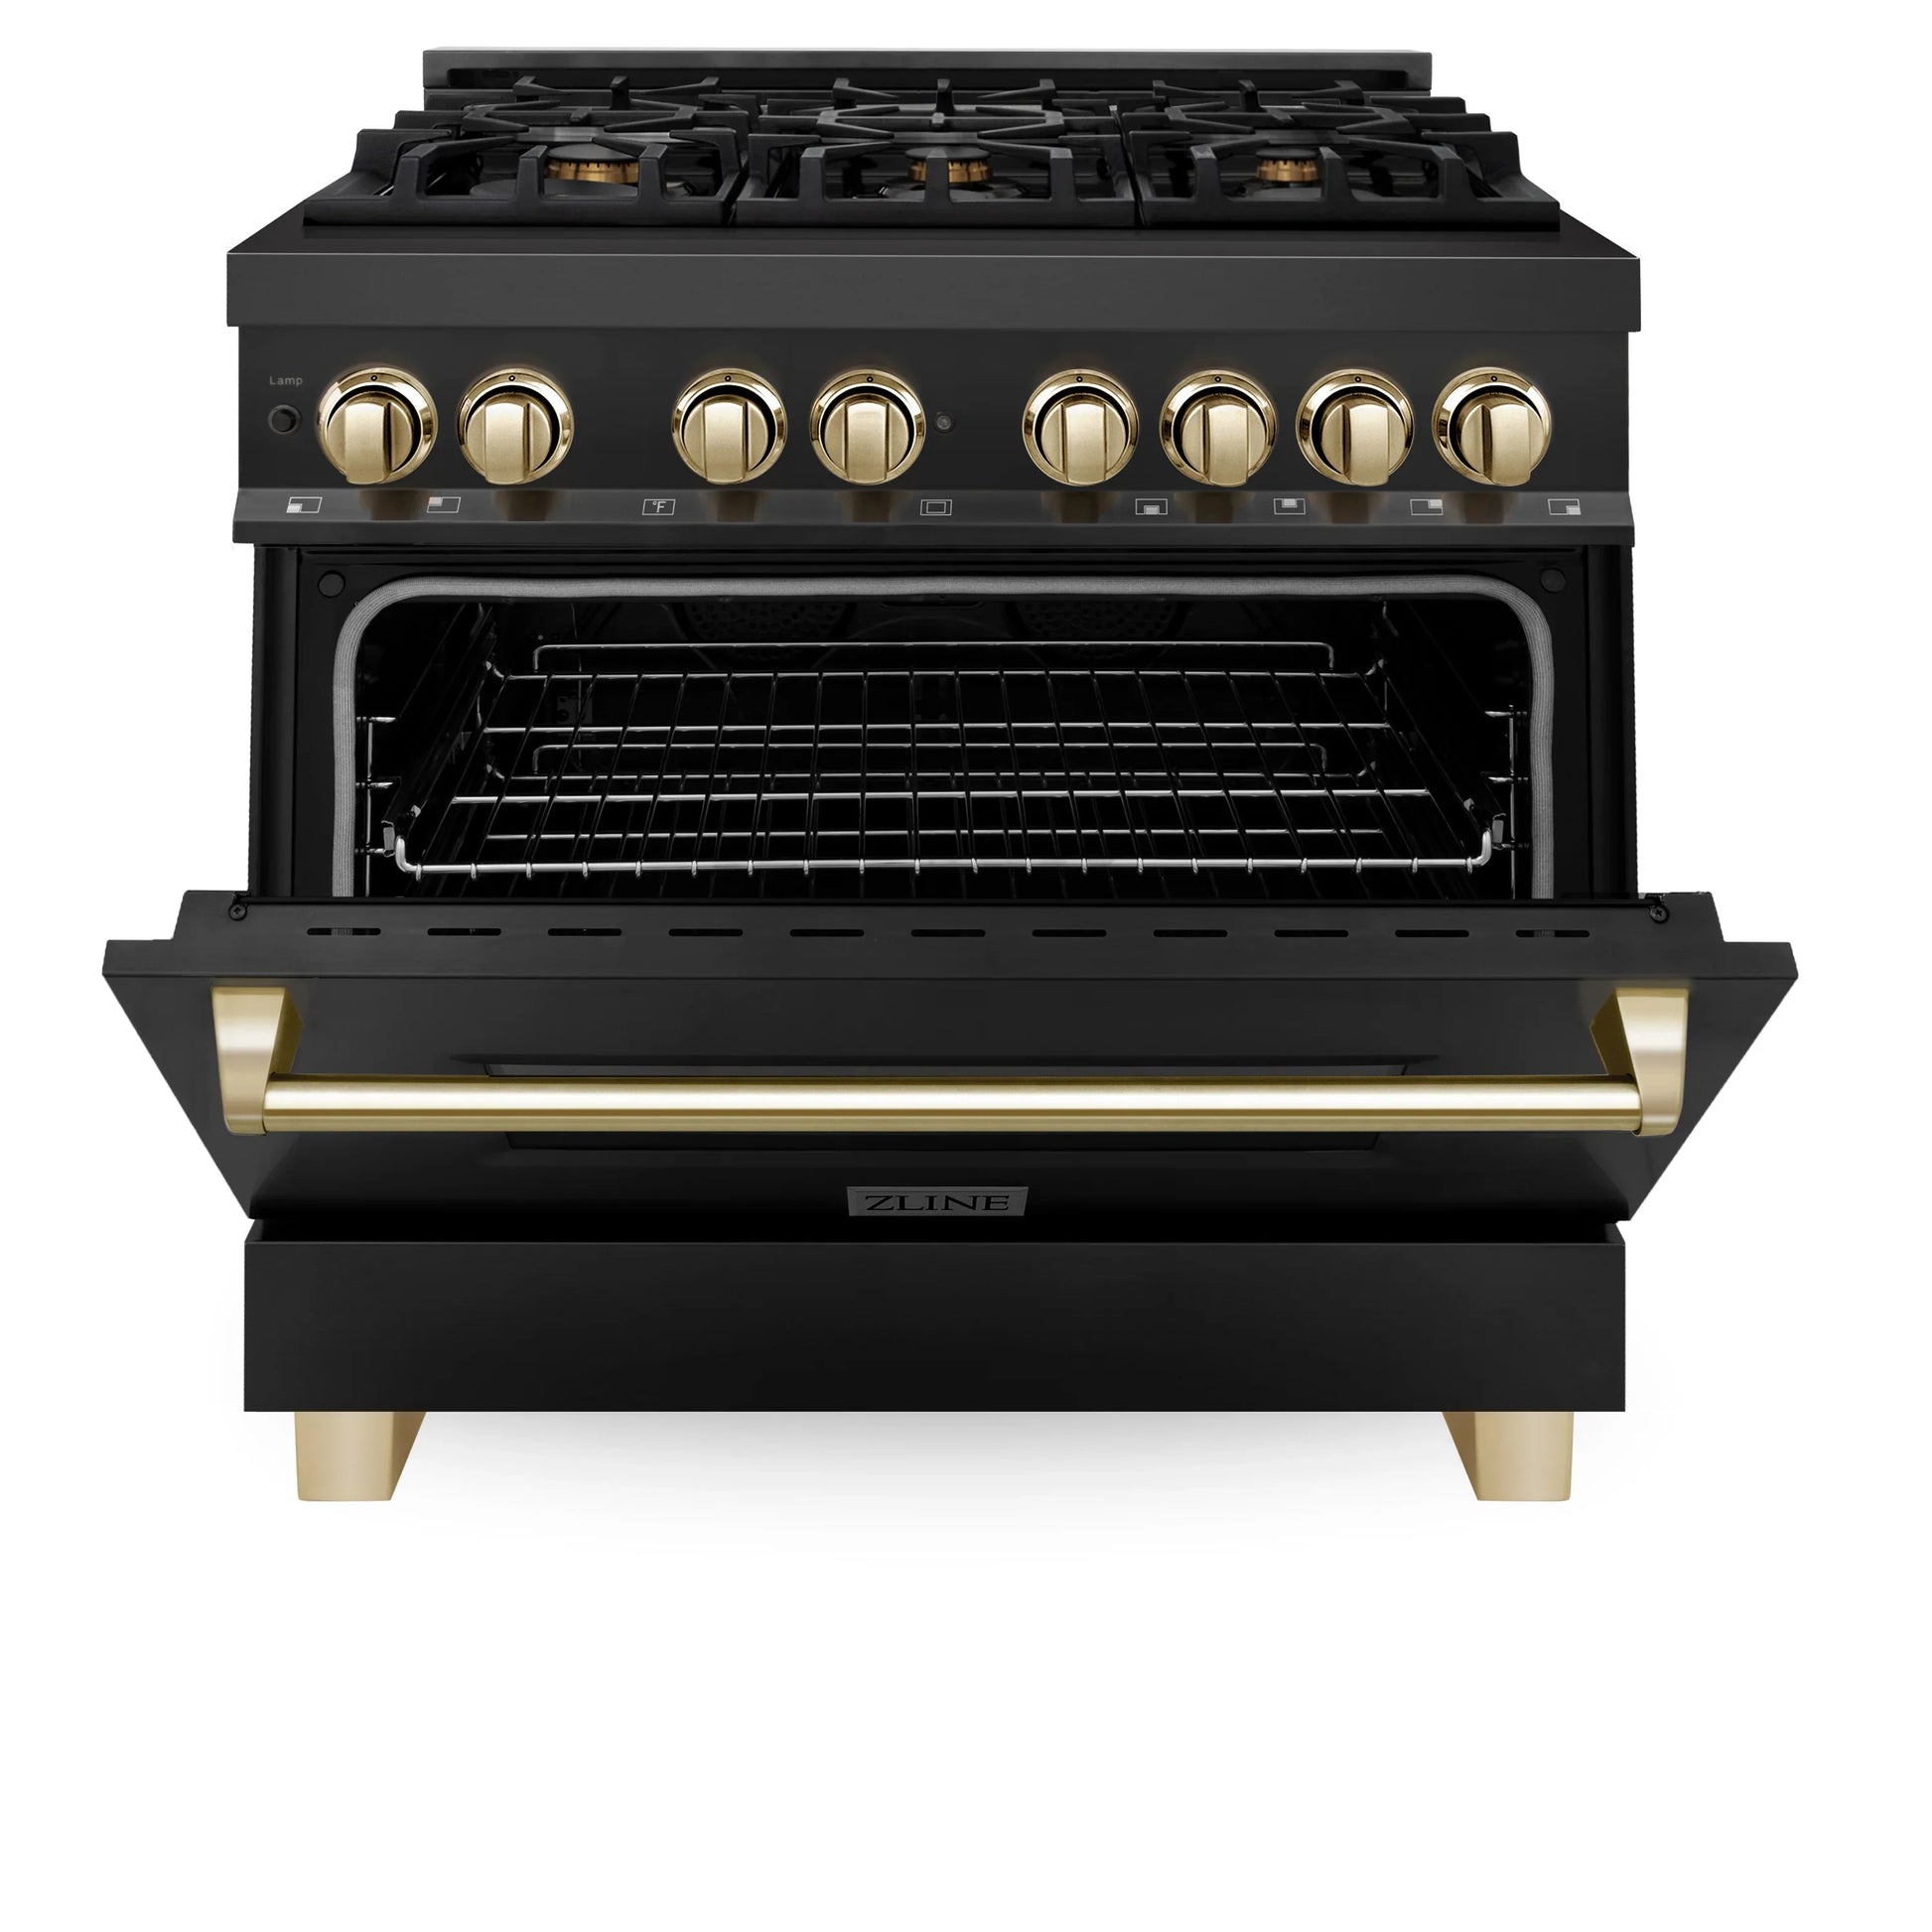 ZLINE Autograph Edition 36" Dual Fuel Range with Gas Stove and Electric Oven - Black Stainless Steel with Gold Accents